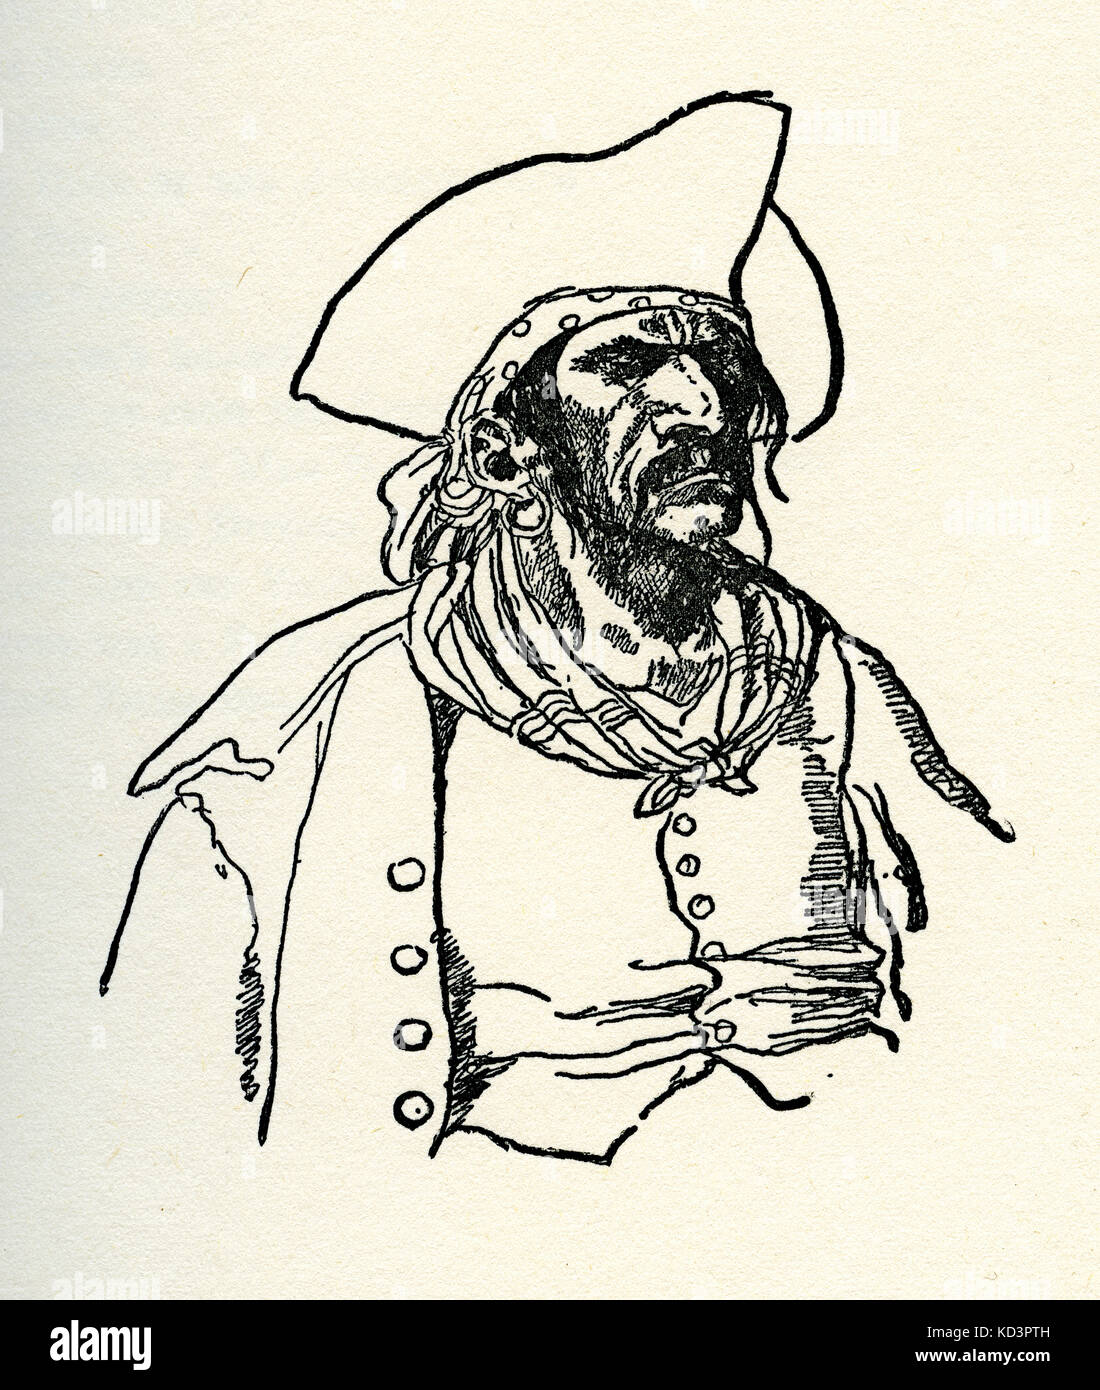 Pirate, illustration by Howard Pyle Stock Photo